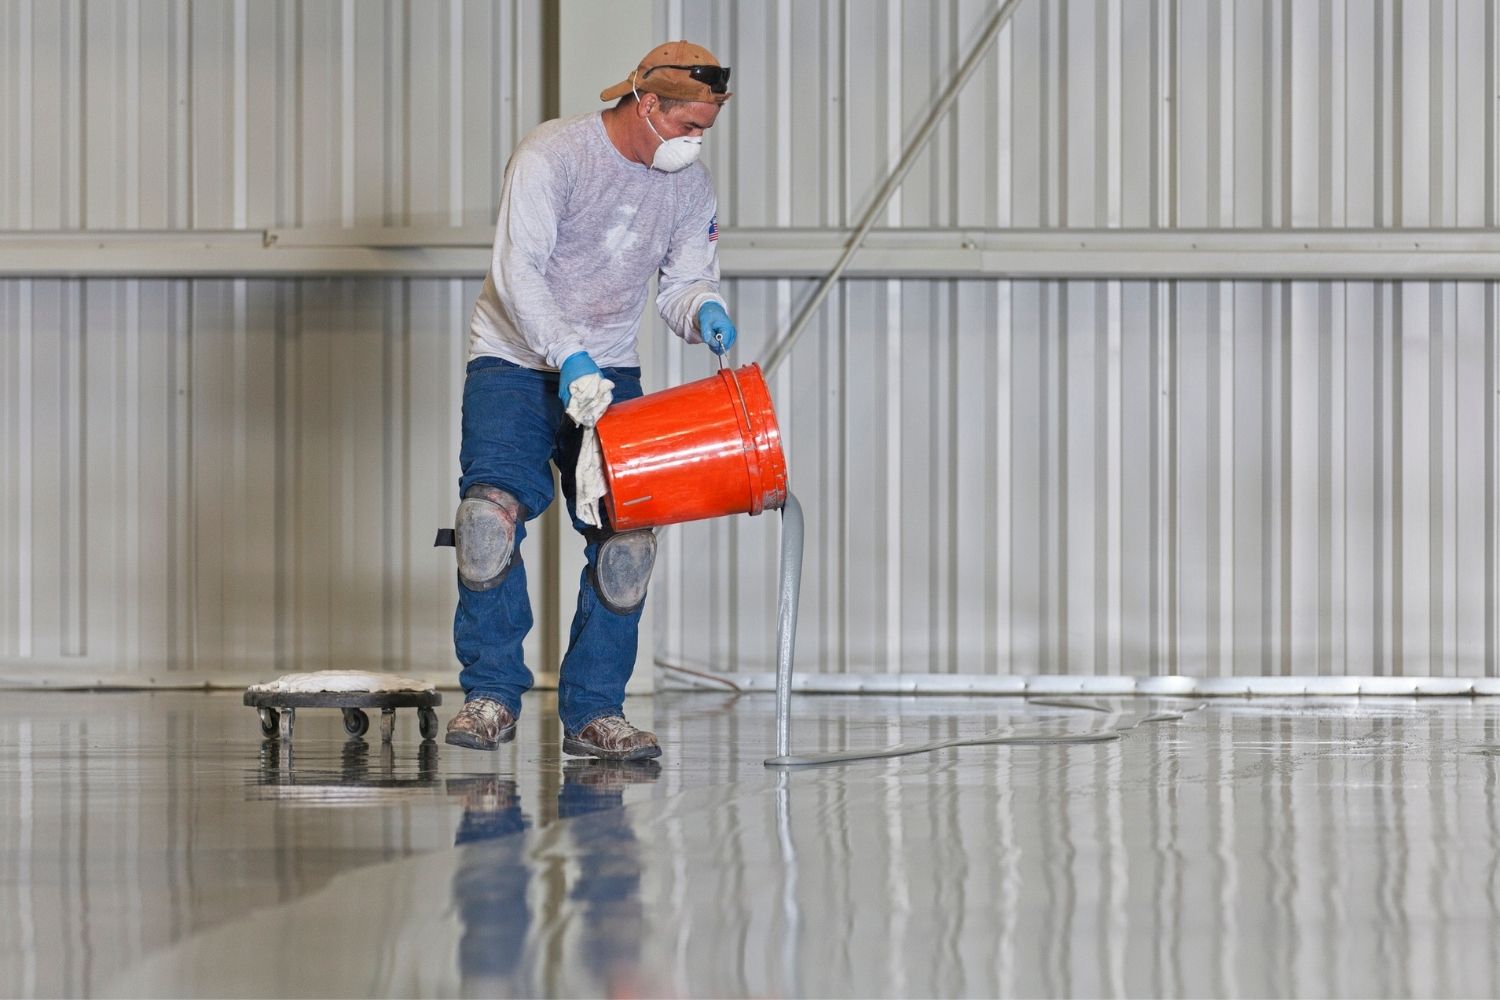 A worker wearing a dust mask pours epoxy coating from a red bucket onto a garage floor.